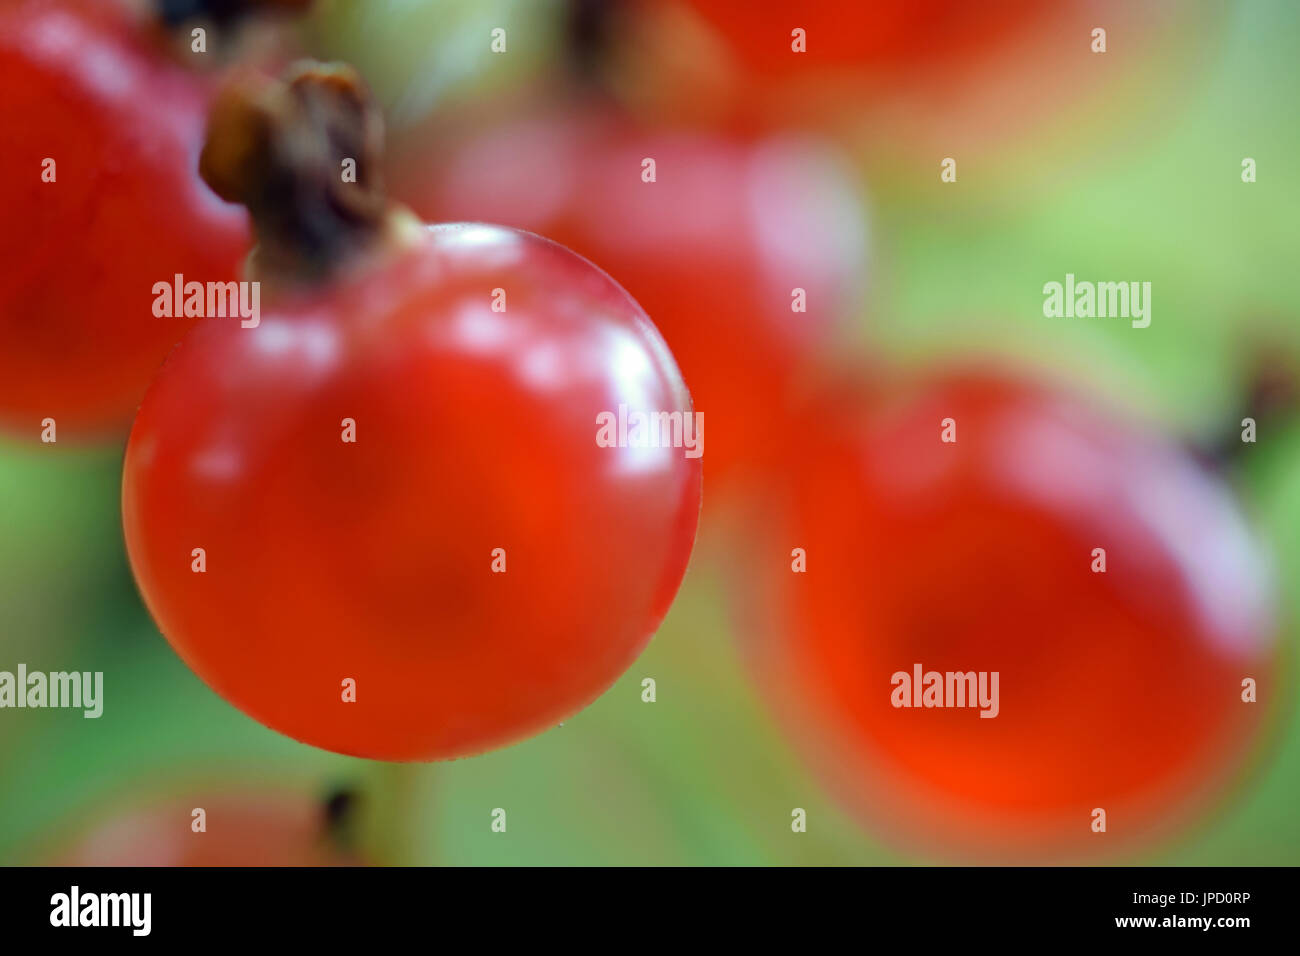 Redcurrant. Macro shot of ripe red currants on a shrub. Focus on foreground. Stock Photo